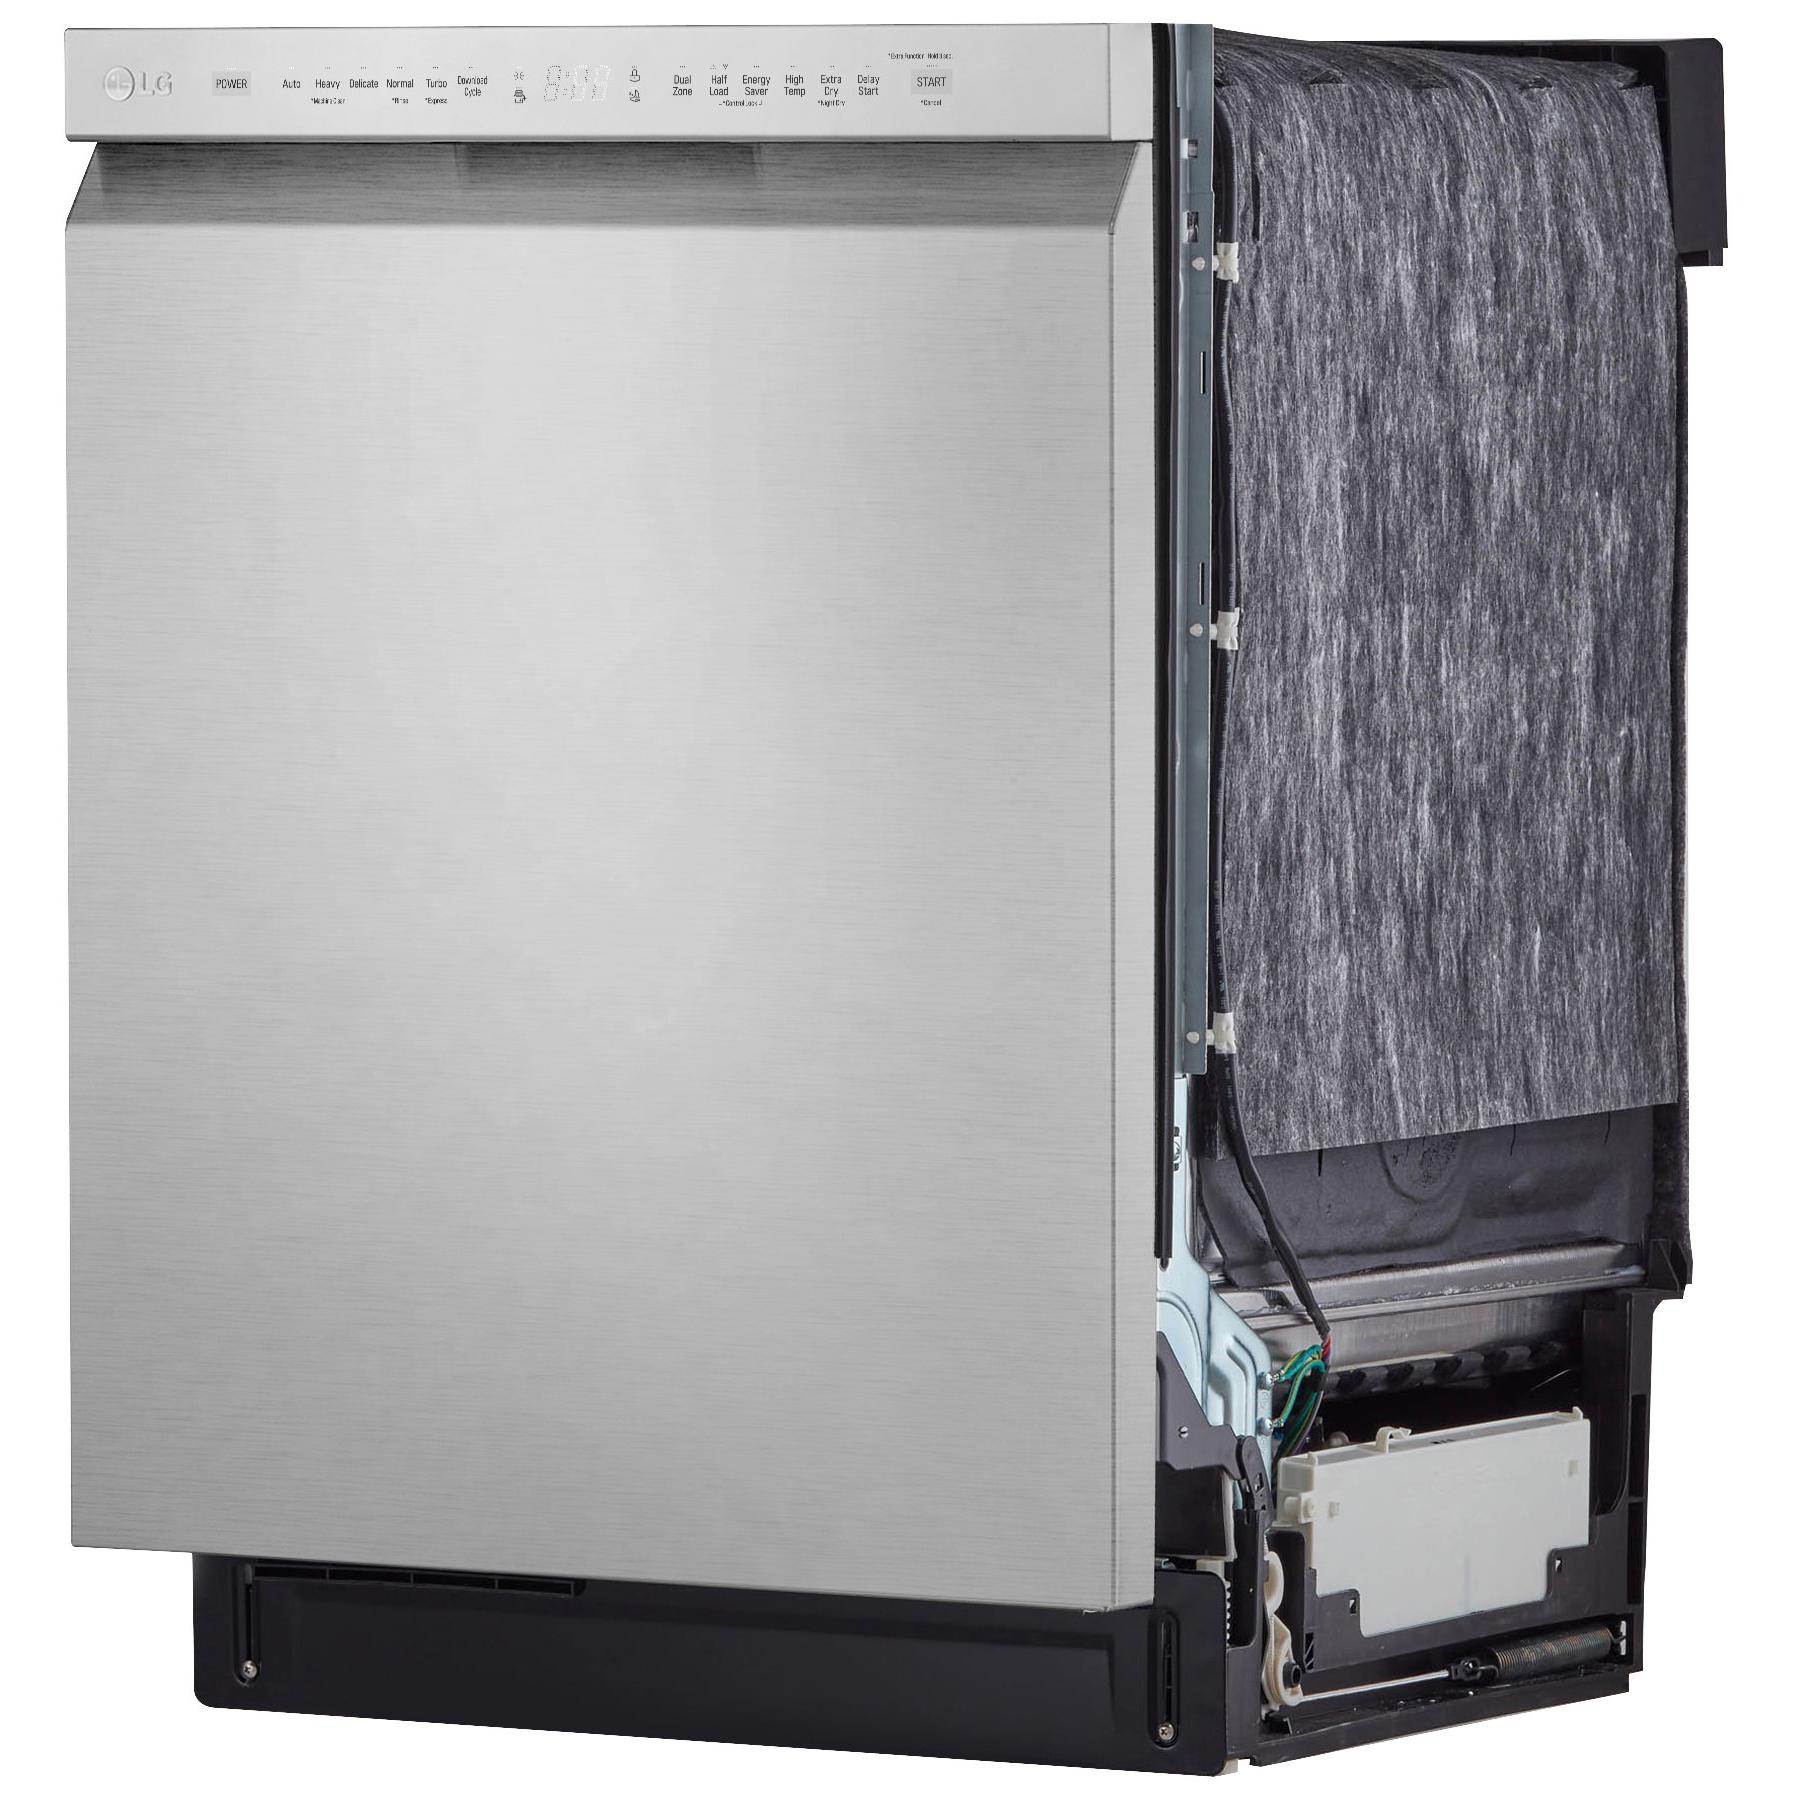 LG 24-inch Built-in Dishwasher with QuadWash? System LDFN4542S